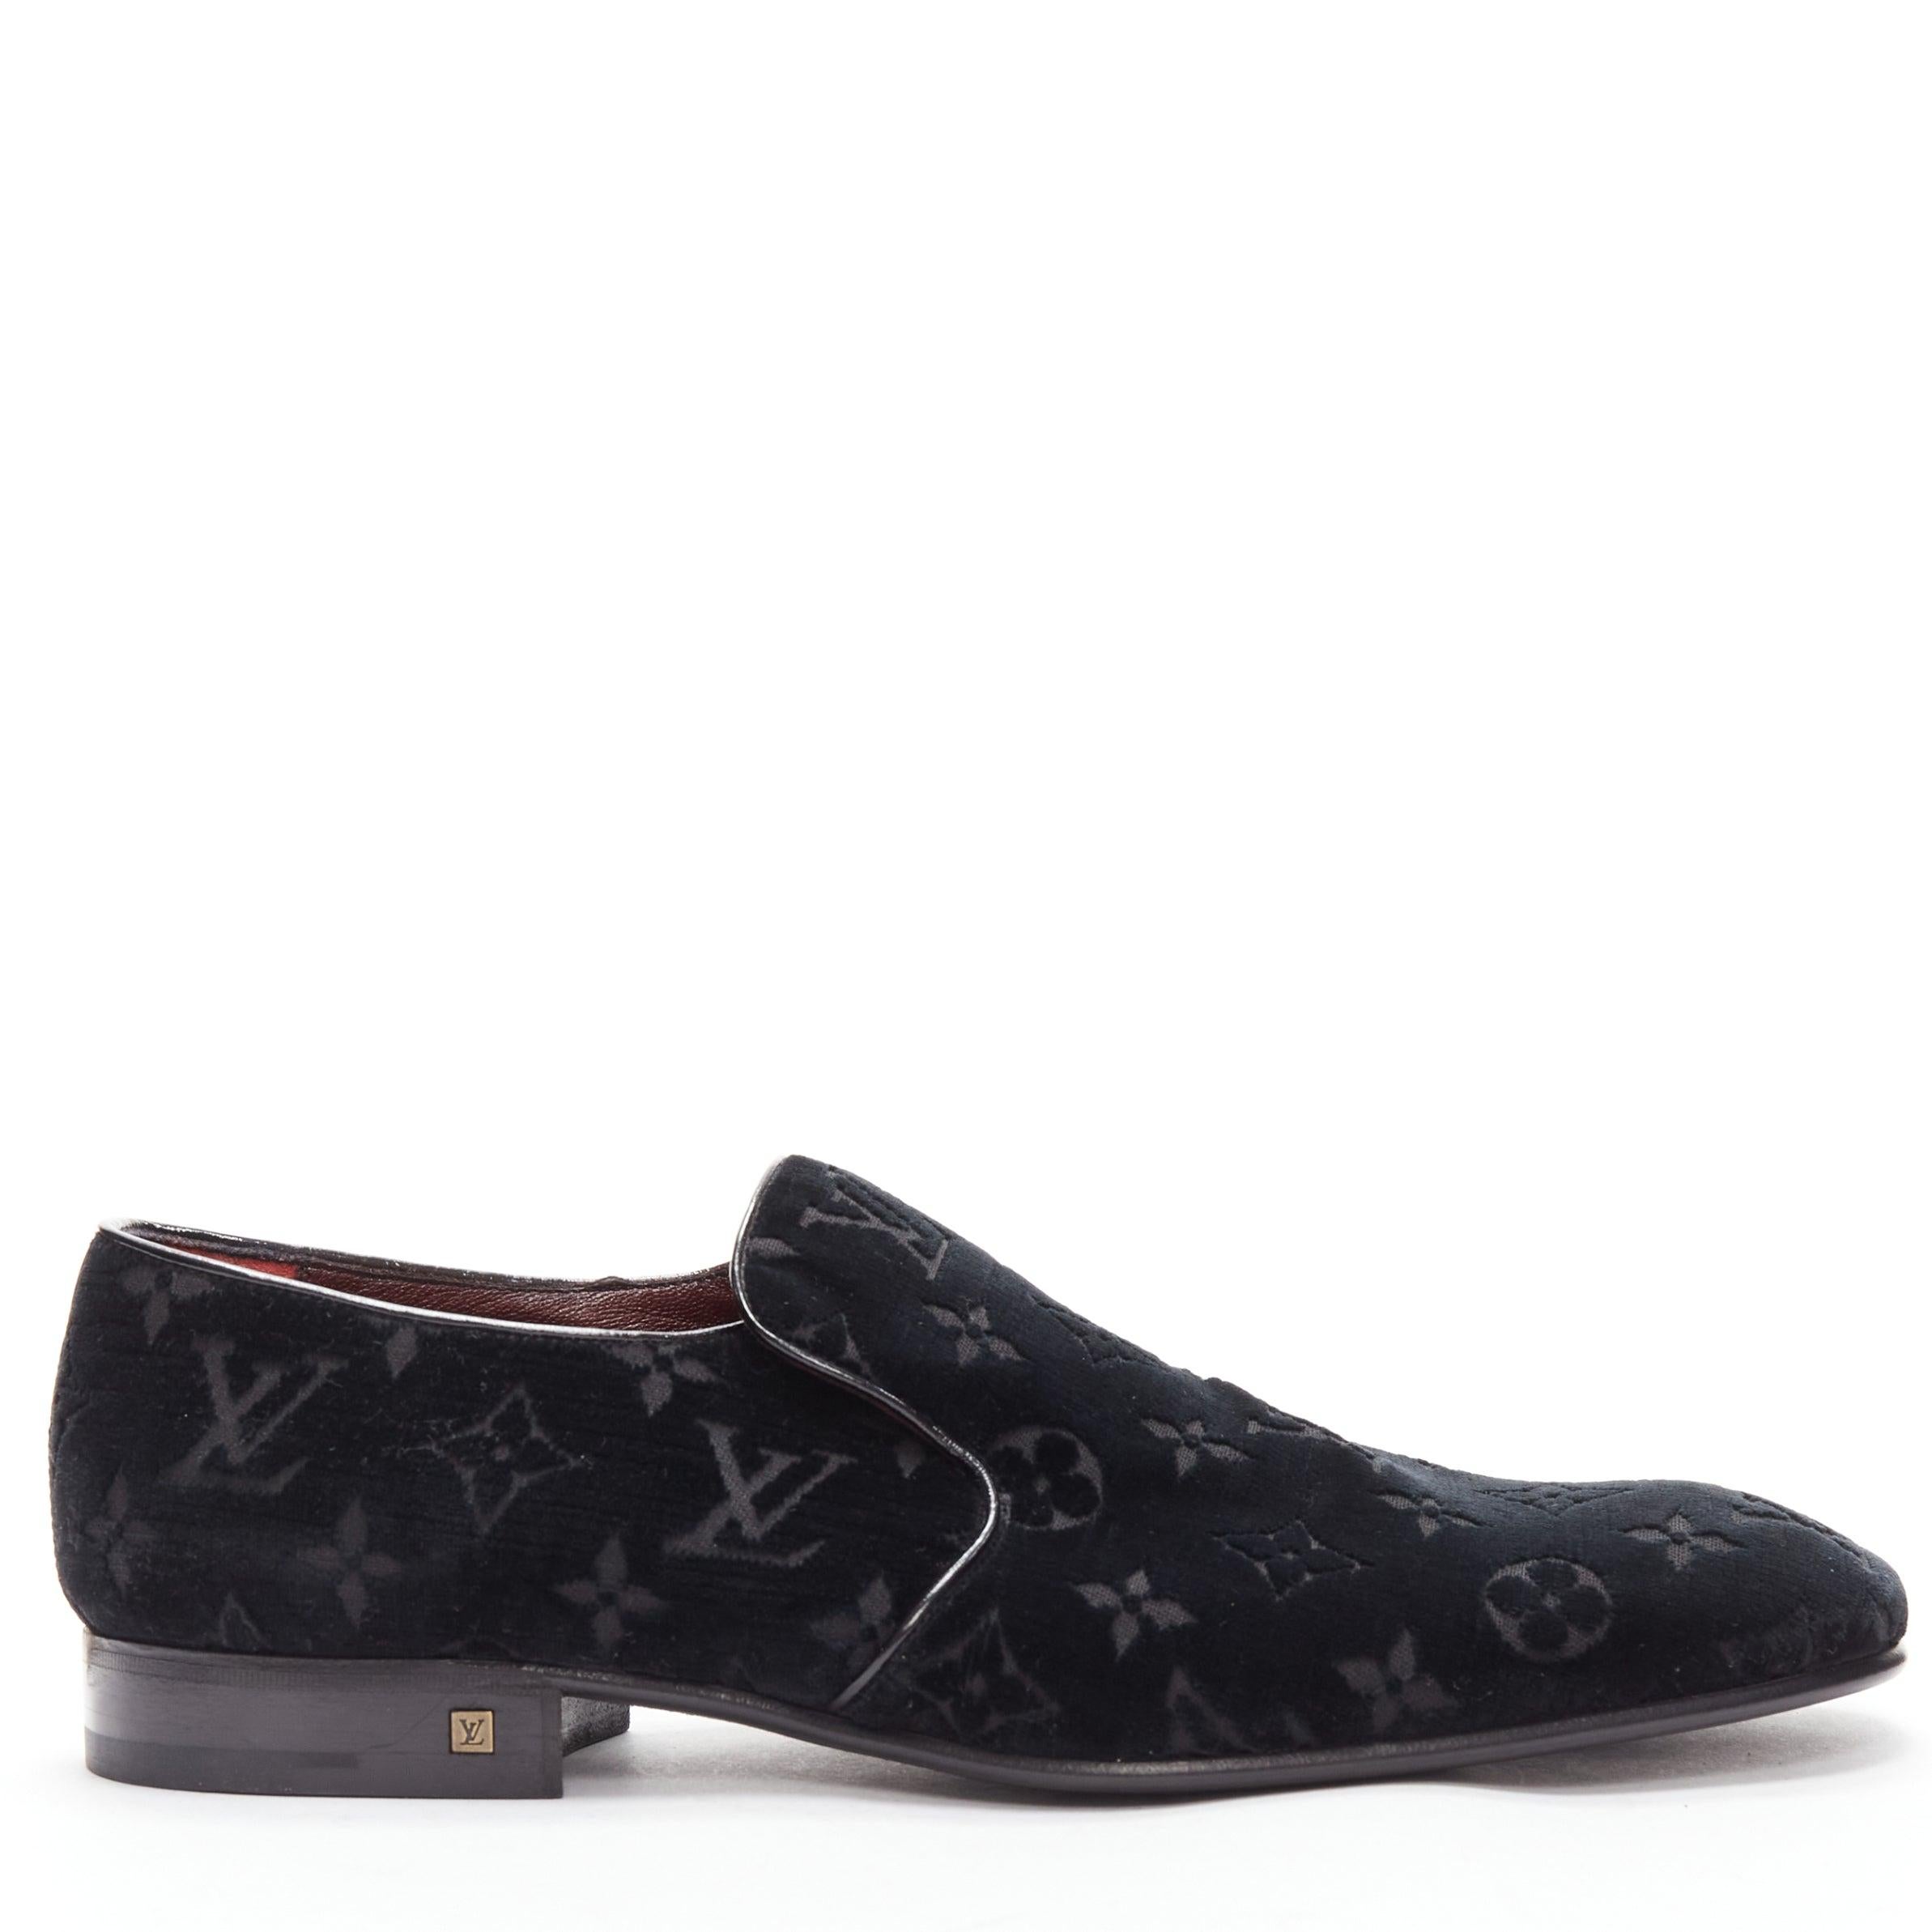 LOUIS VUITTON black LV monogram velvet Le Smoking loafer shoes UK8 EU42
Reference: TGAS/D00665
Brand: Louis Vuitton
Material: Velvet
Color: Black
Pattern: Monogram
Closure: Slip On
Lining: Red Leather
Extra Details: Gold LV logo detail at stacked